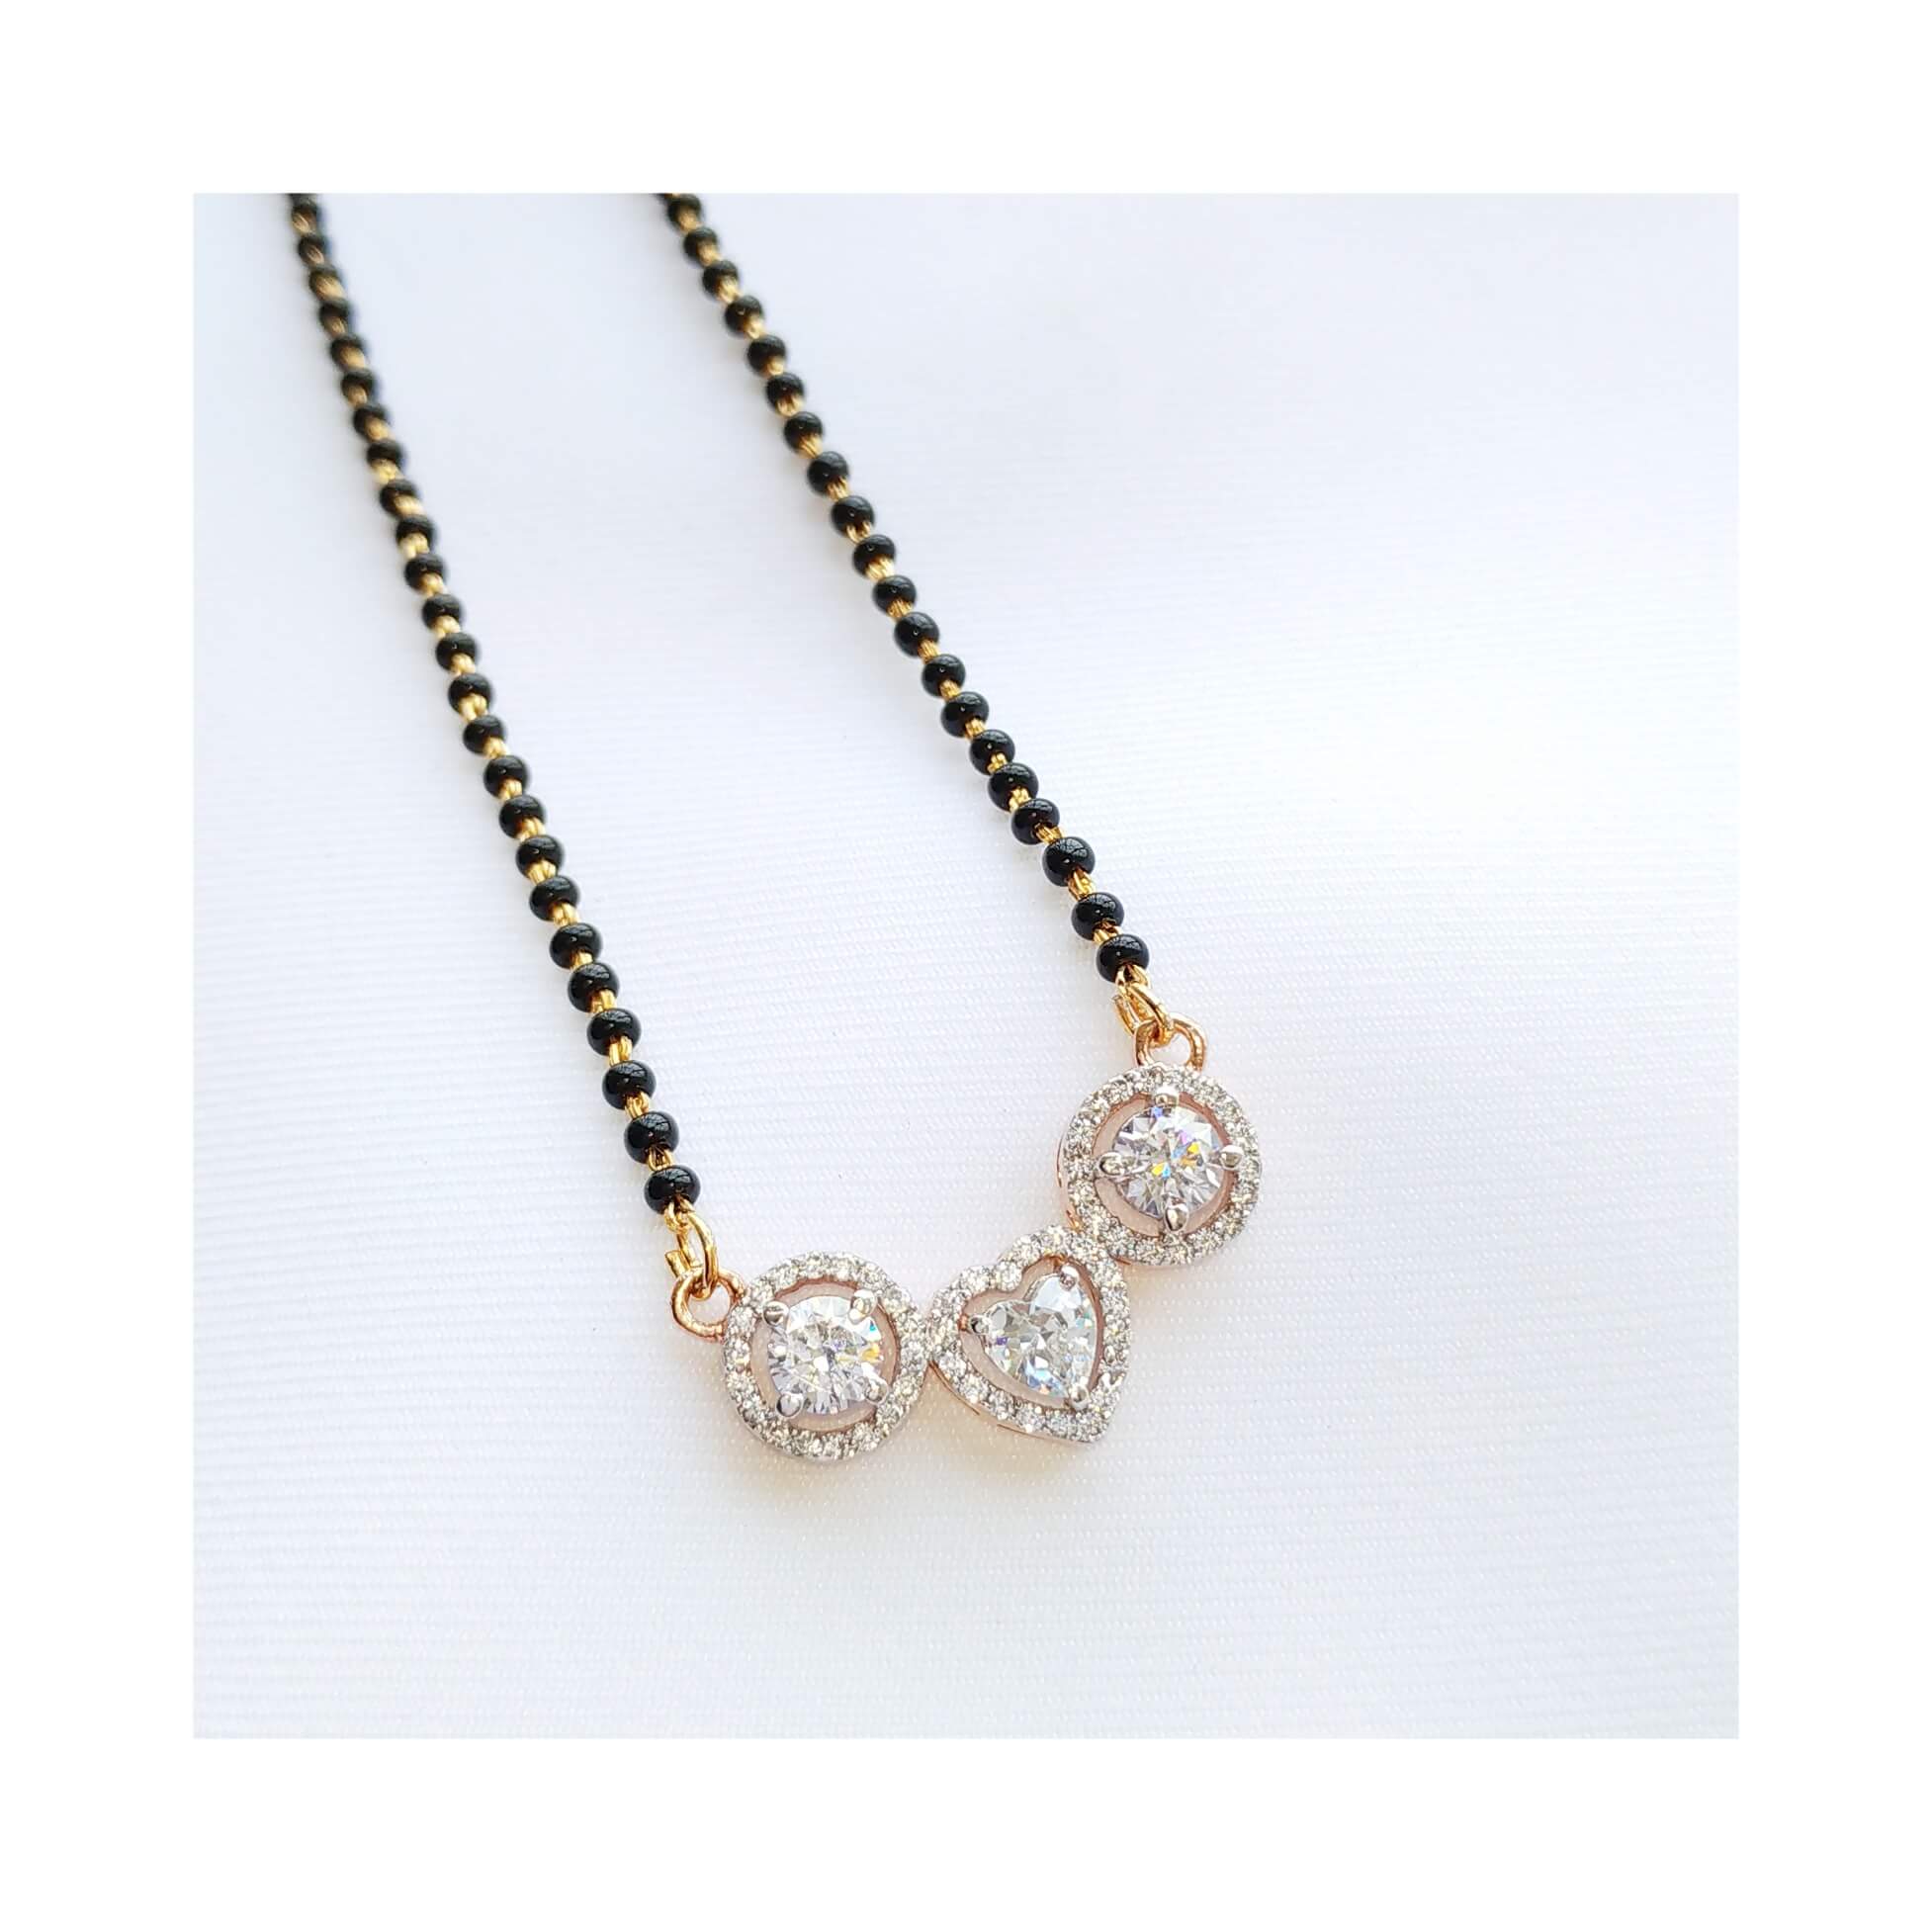 The Hearted Romance Neck Mangalsutra